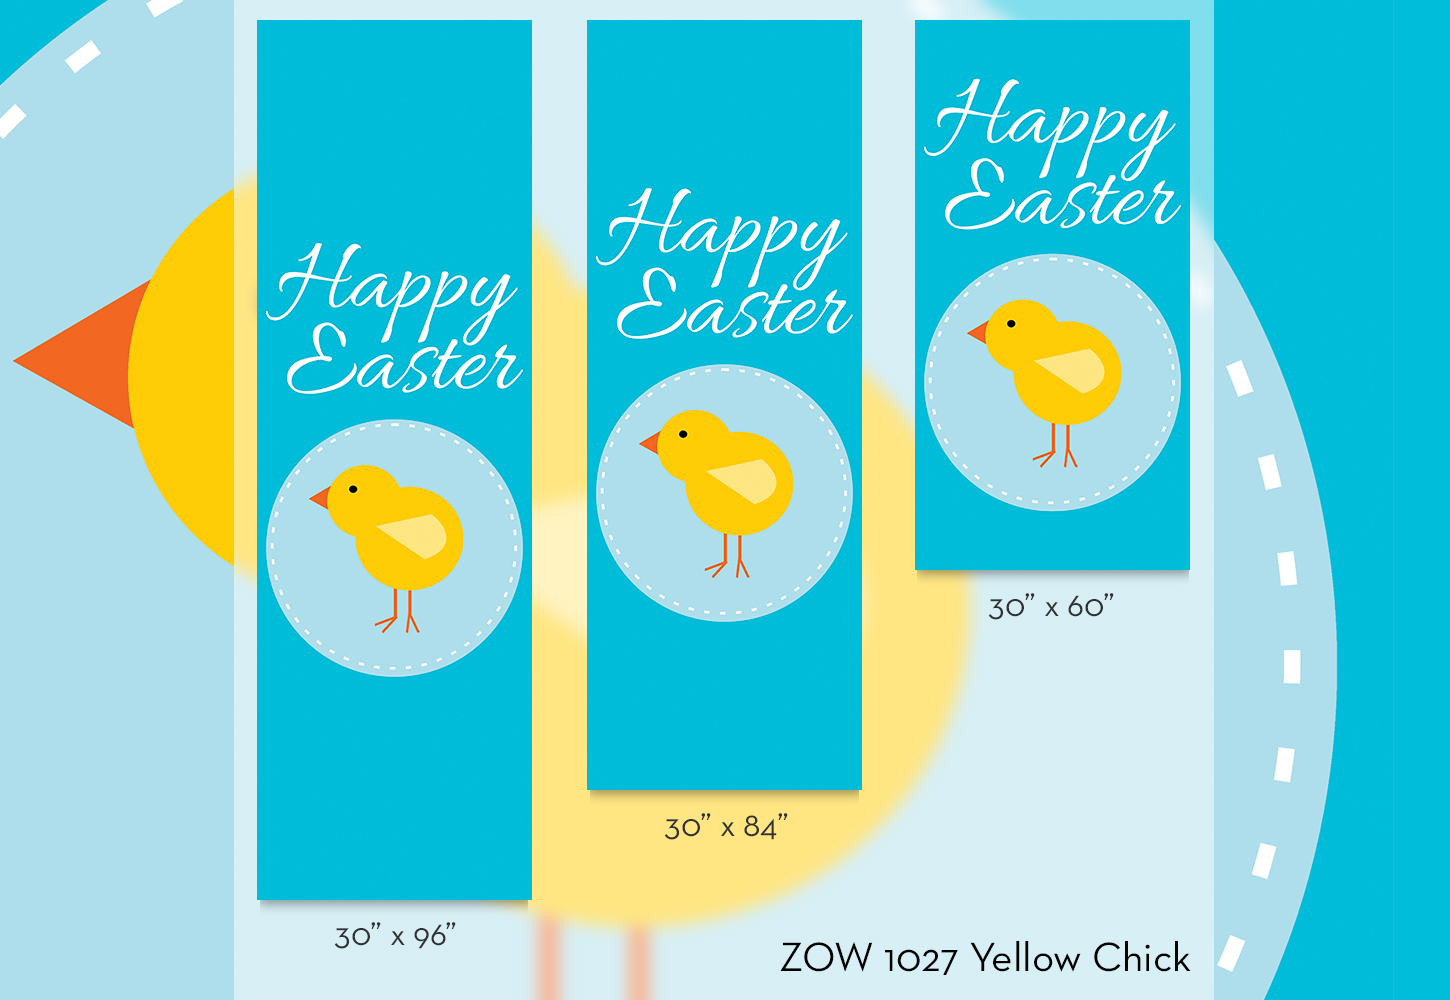 ZOW 1027 Yellow Chick